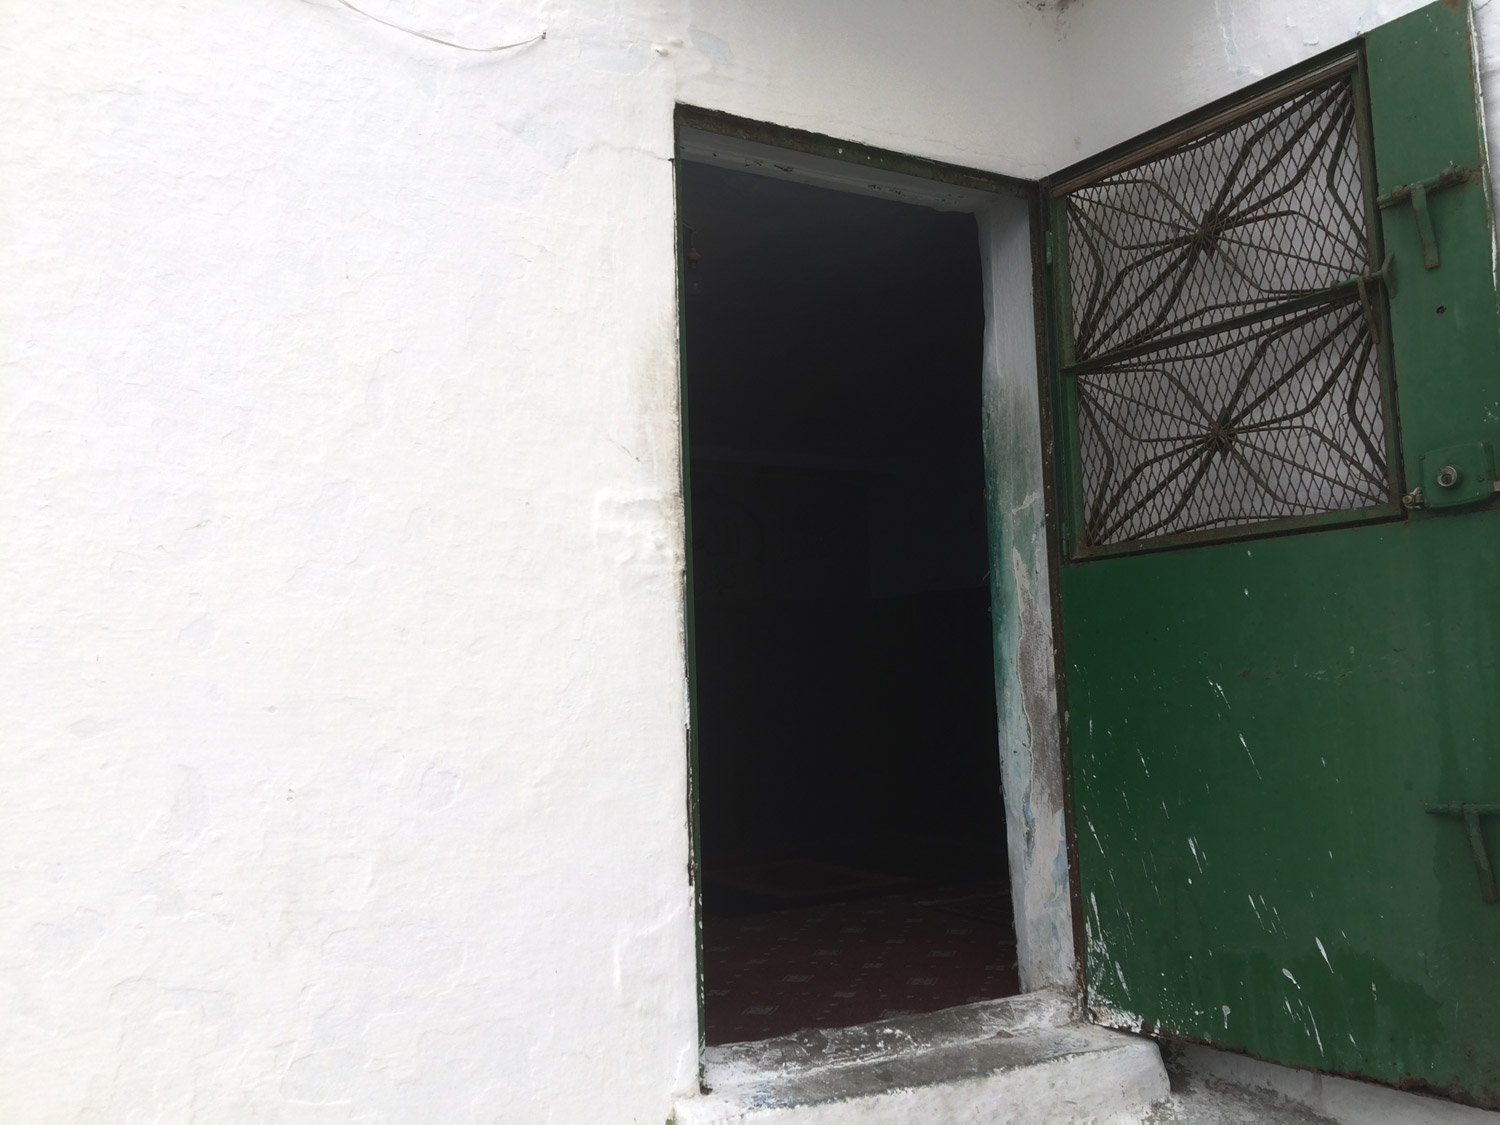 View of the open door to a small structure near the entrance